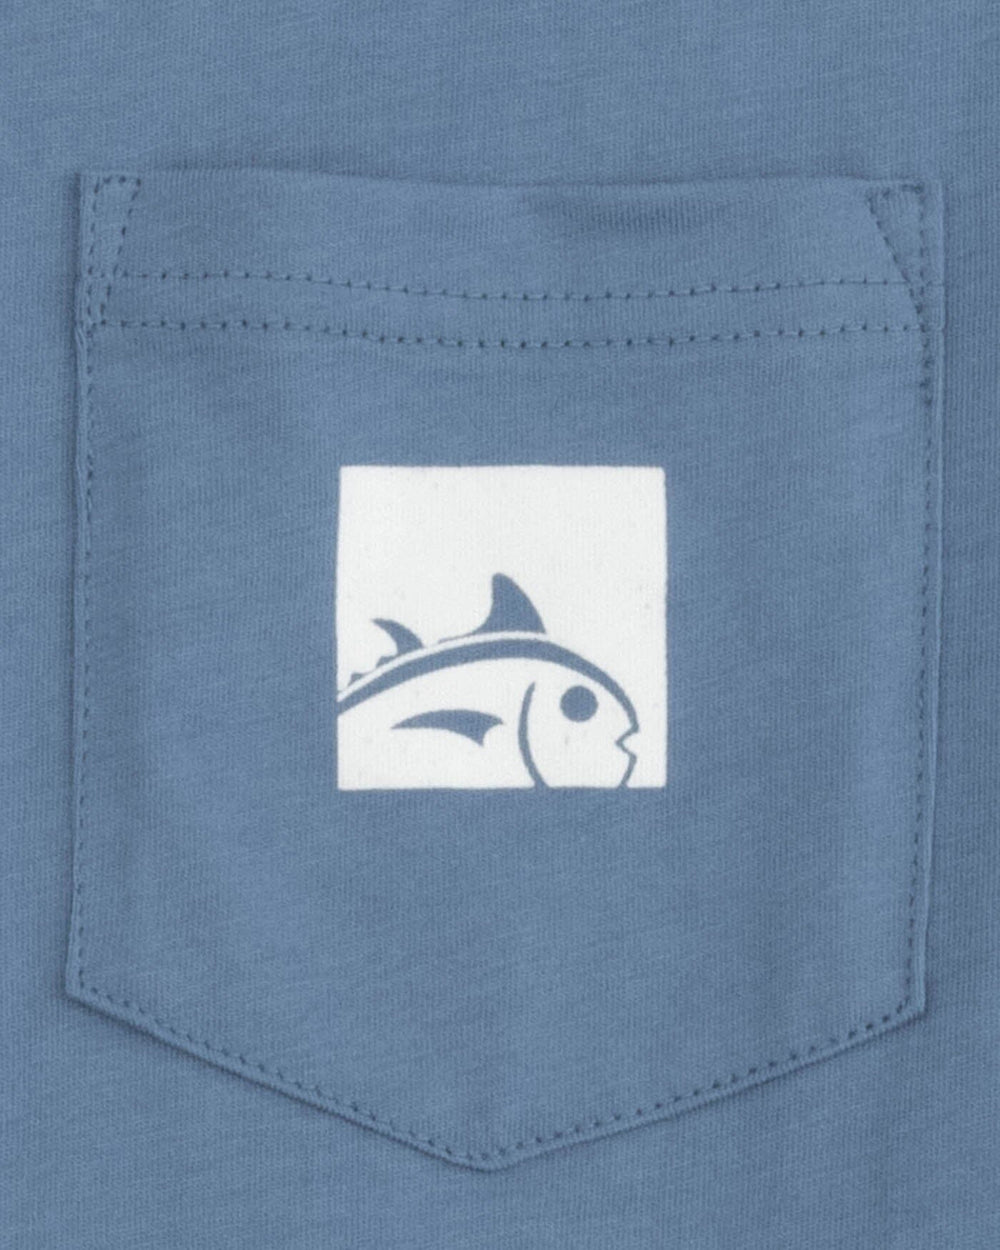 The detail view of the Southern Tide Cropped Skipjack Box Short Sleeve T-Shirt by Southern Tide - Coronet Blue